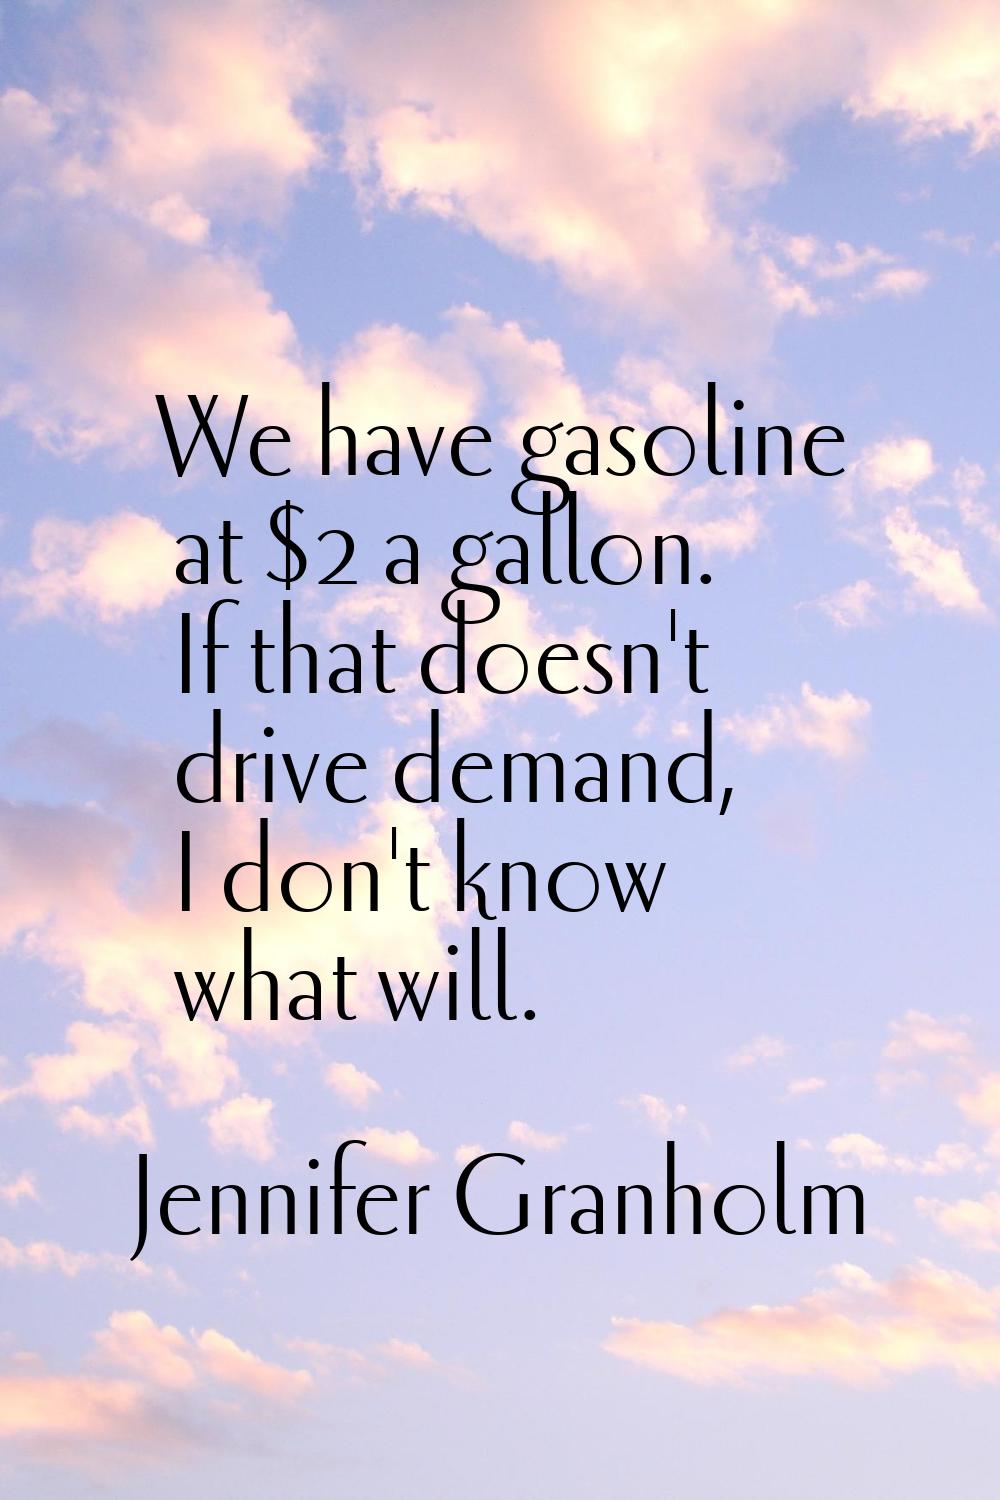 We have gasoline at $2 a gallon. If that doesn't drive demand, I don't know what will.